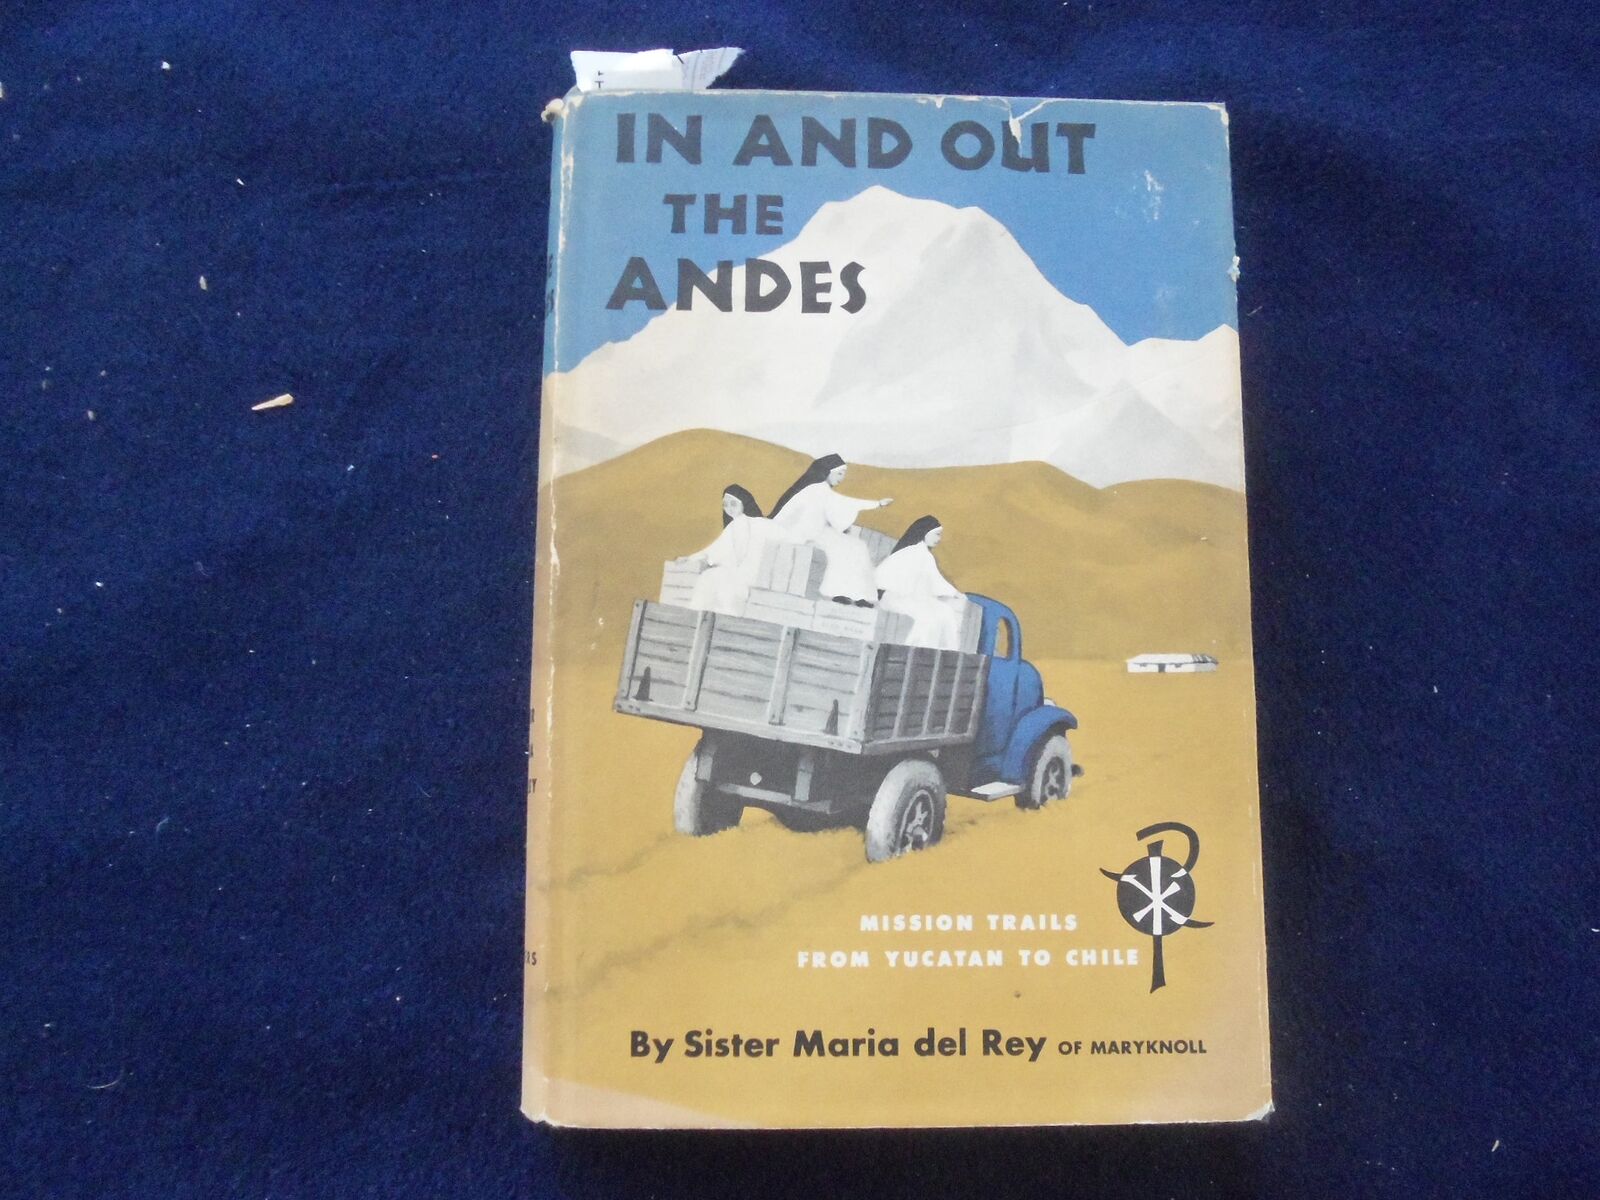 1955 IN AND OUT THE ANDES HARDCOVER BOOK BY SISTER MARIA DEL REY - KD 8602